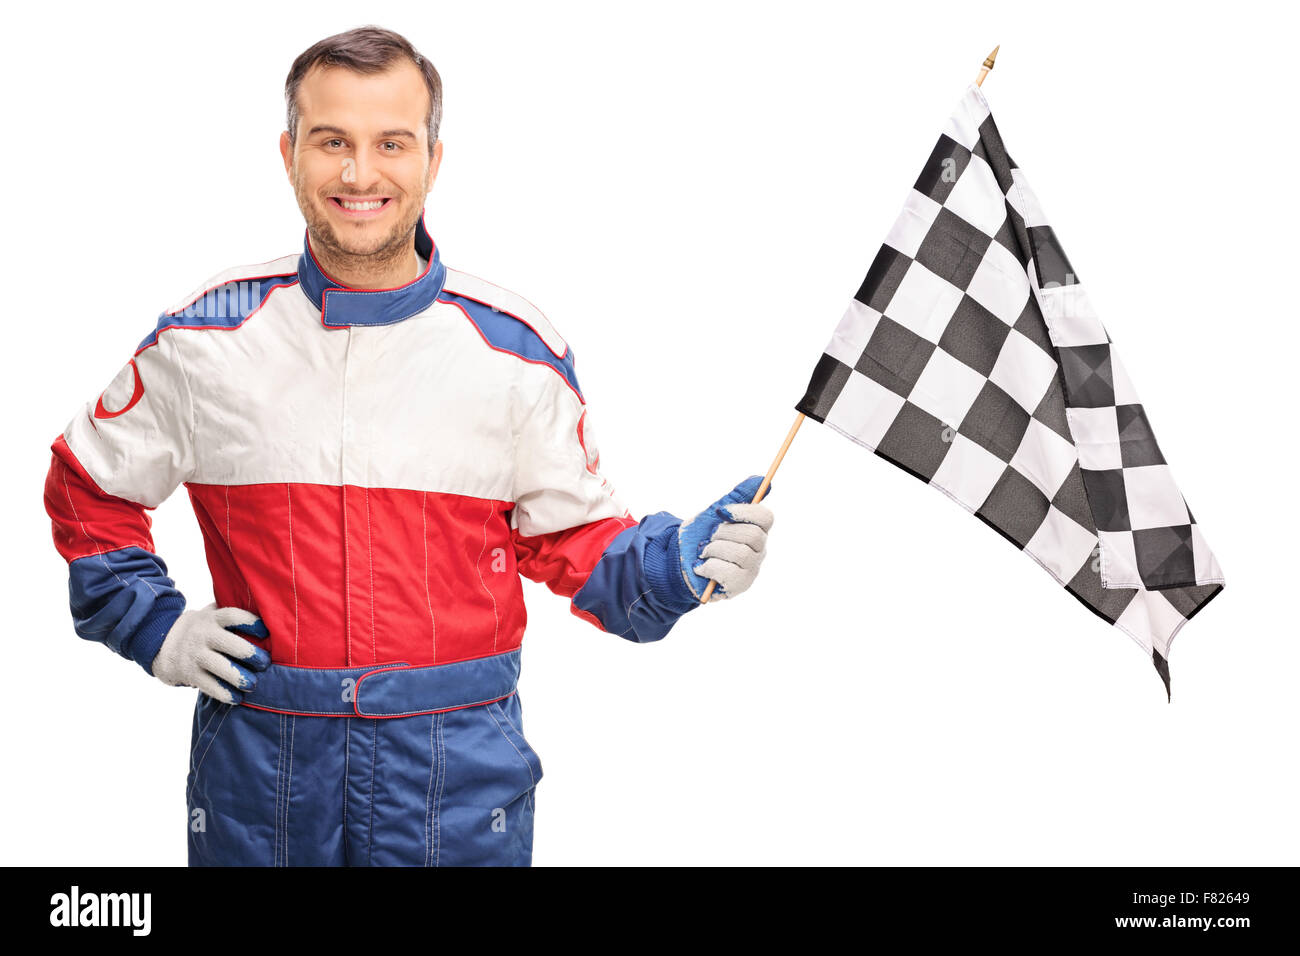 Young man in a racing suit waving a checkered race flag and looking at the camera isolated on white background Stock Photo